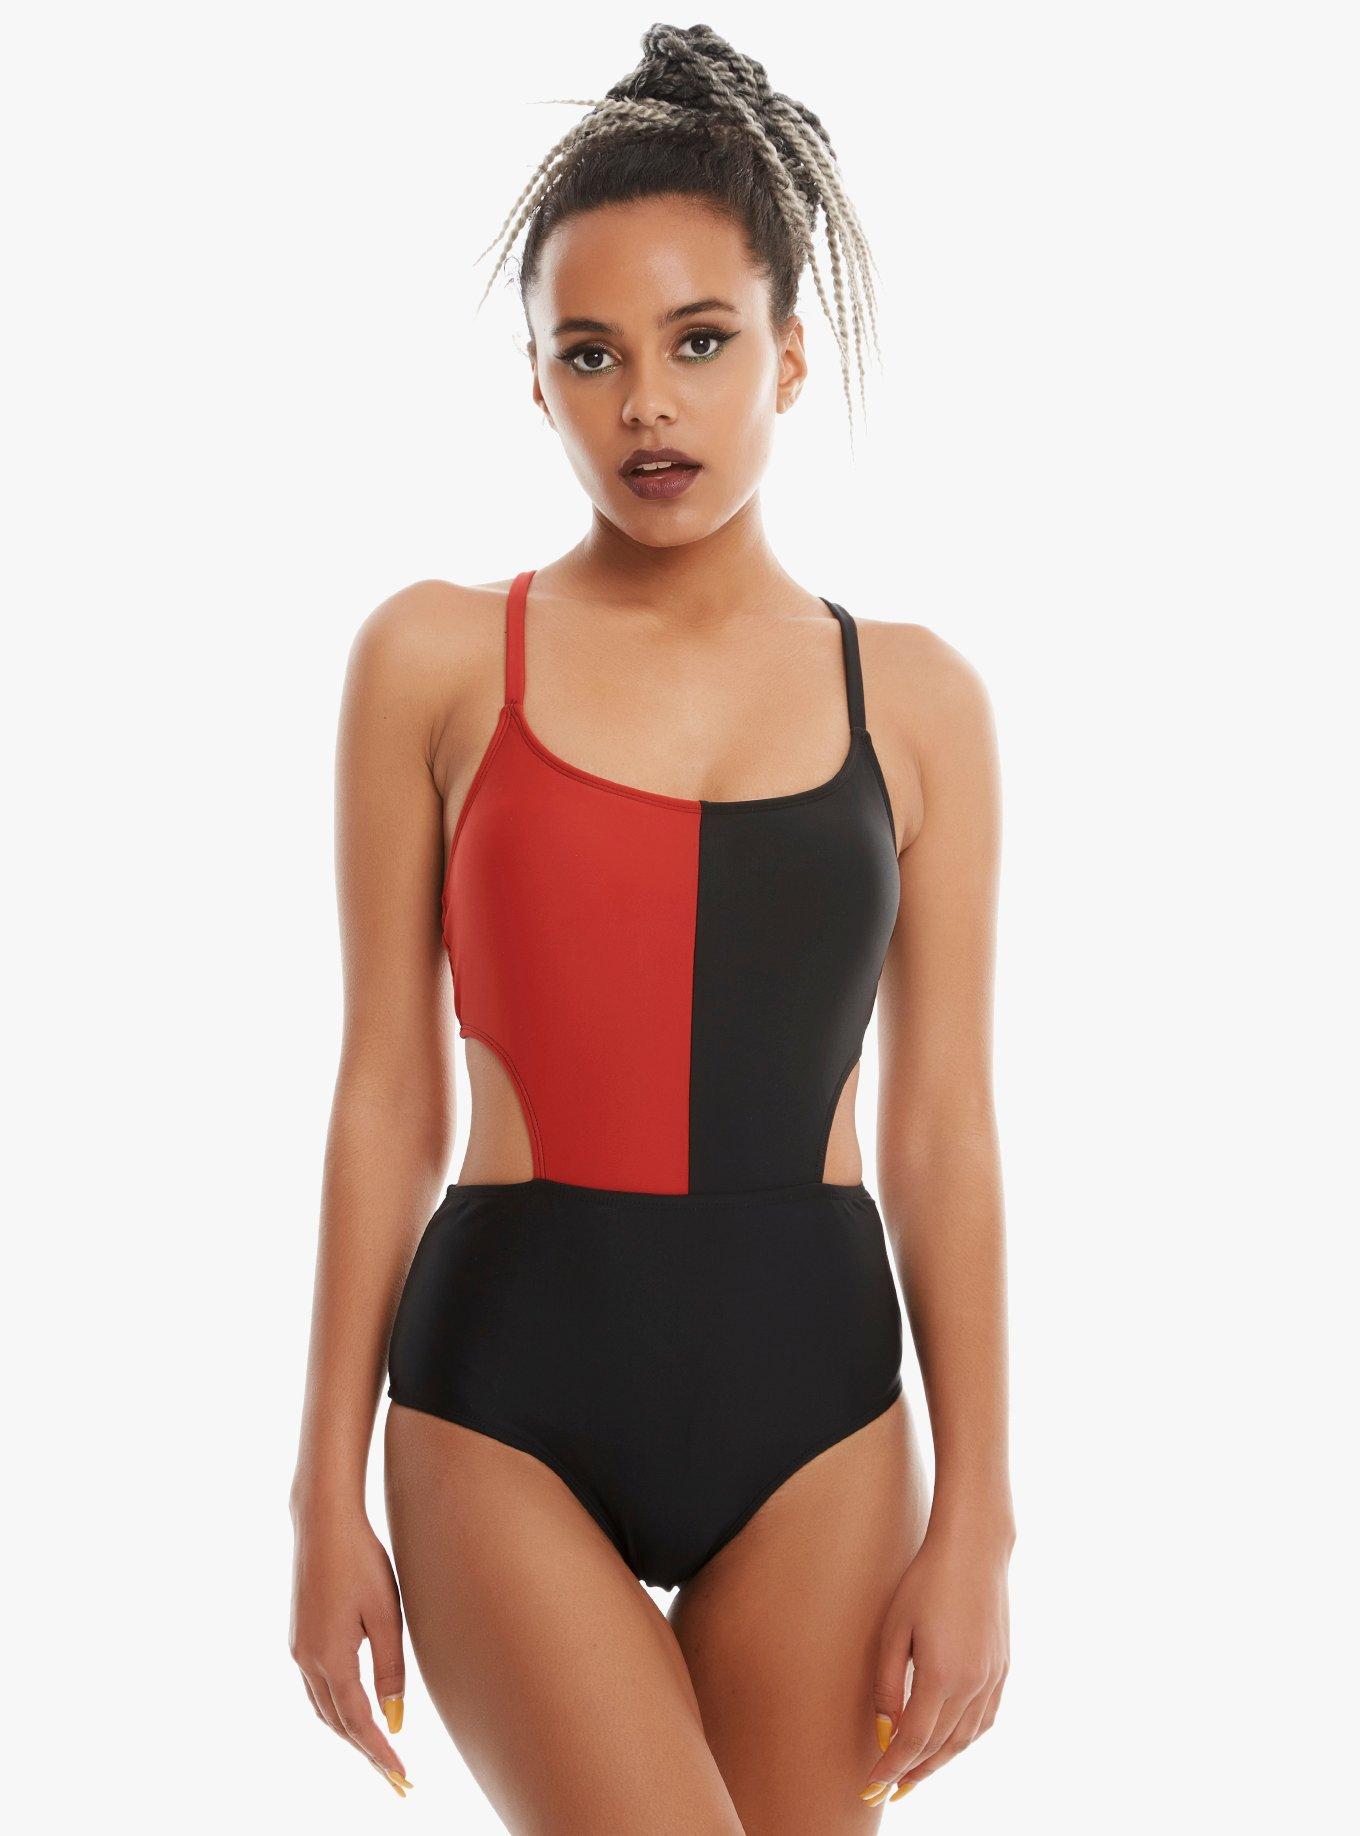 DC Comics Harley Quinn Cut-Out Swimsuit, RED, hi-res